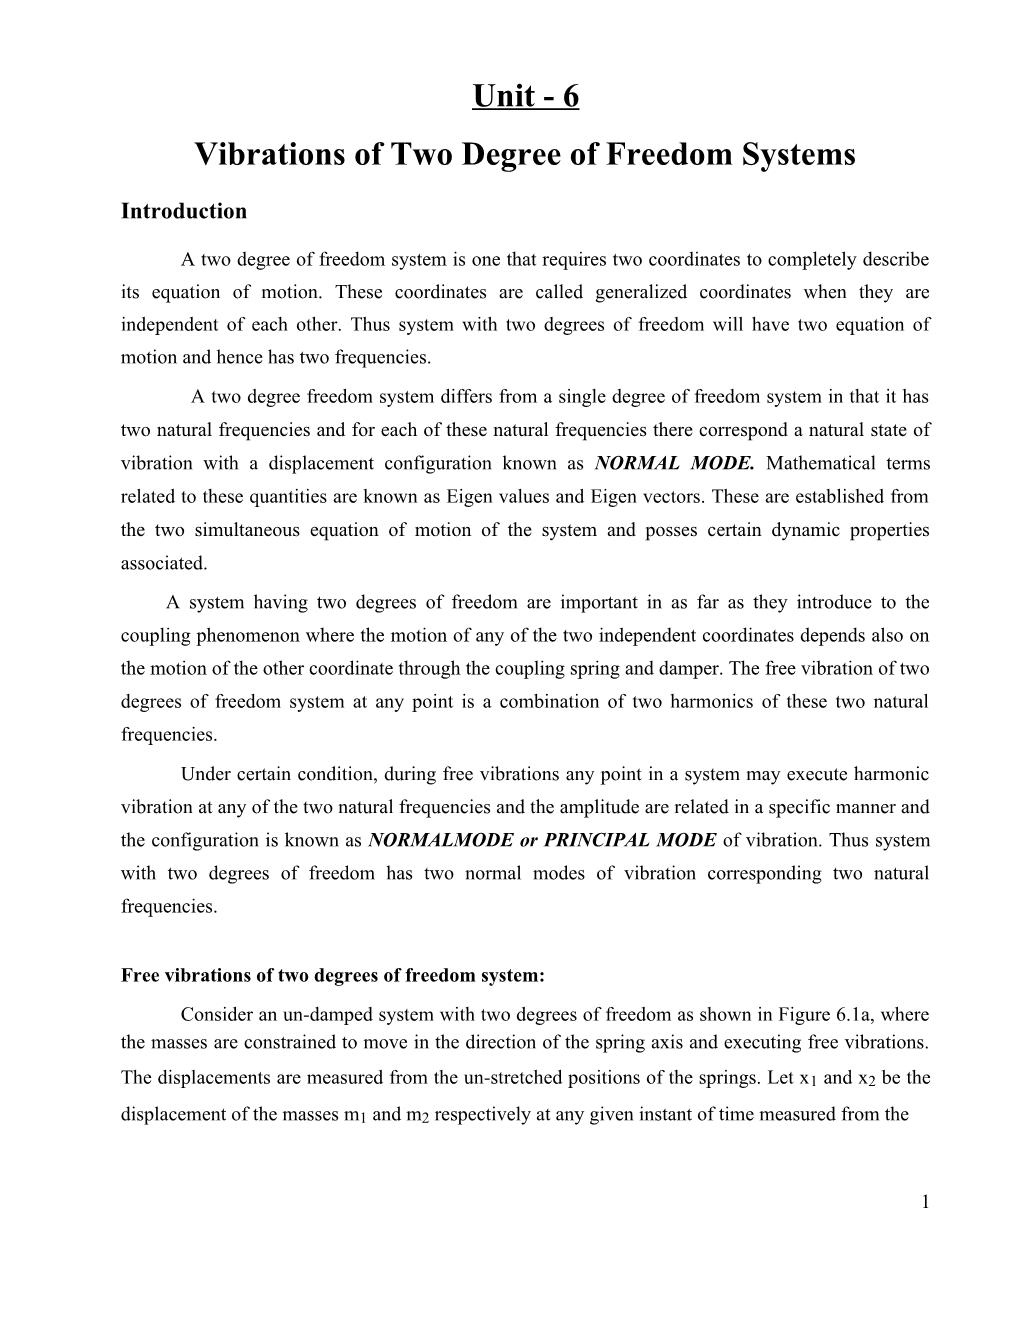 Vibrations of Two Degree of Freedom Systems